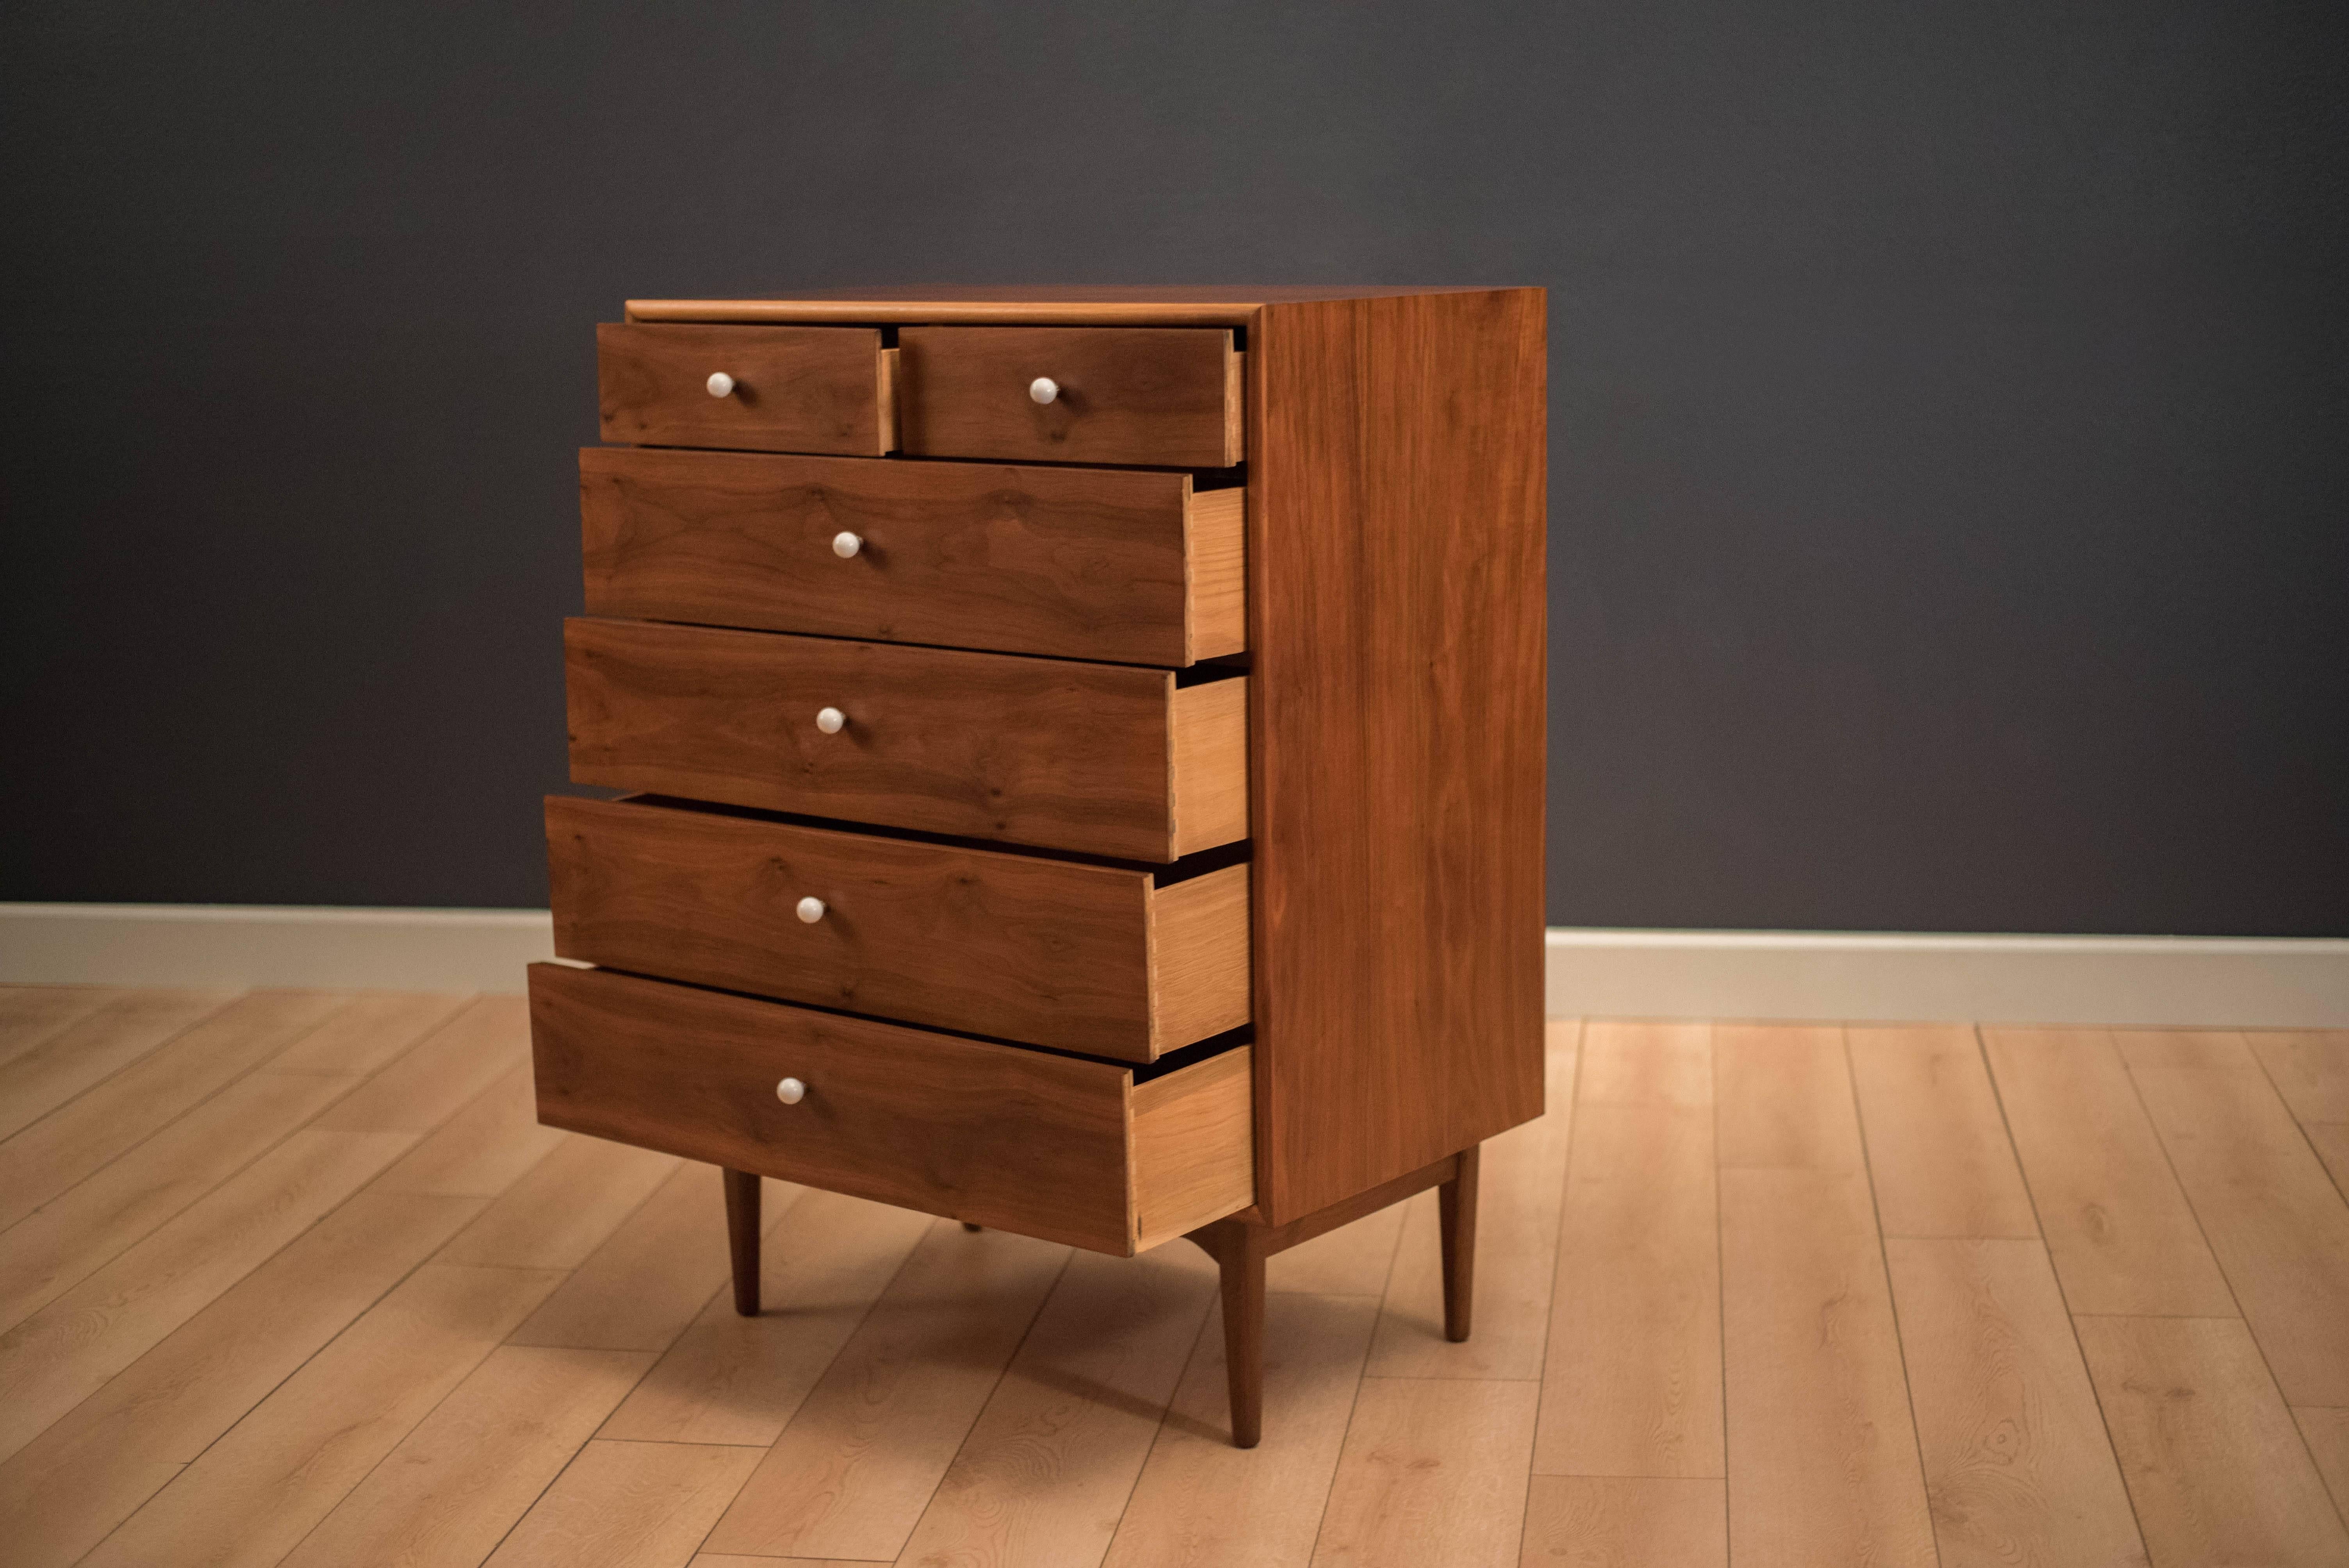 Mid Century Drexel declaration highboy dresser by Kipp Stewart & Stewart McDougall. This piece displays continuous black walnut grains and includes six dovetailed drawers with the original porcelain white knobs.